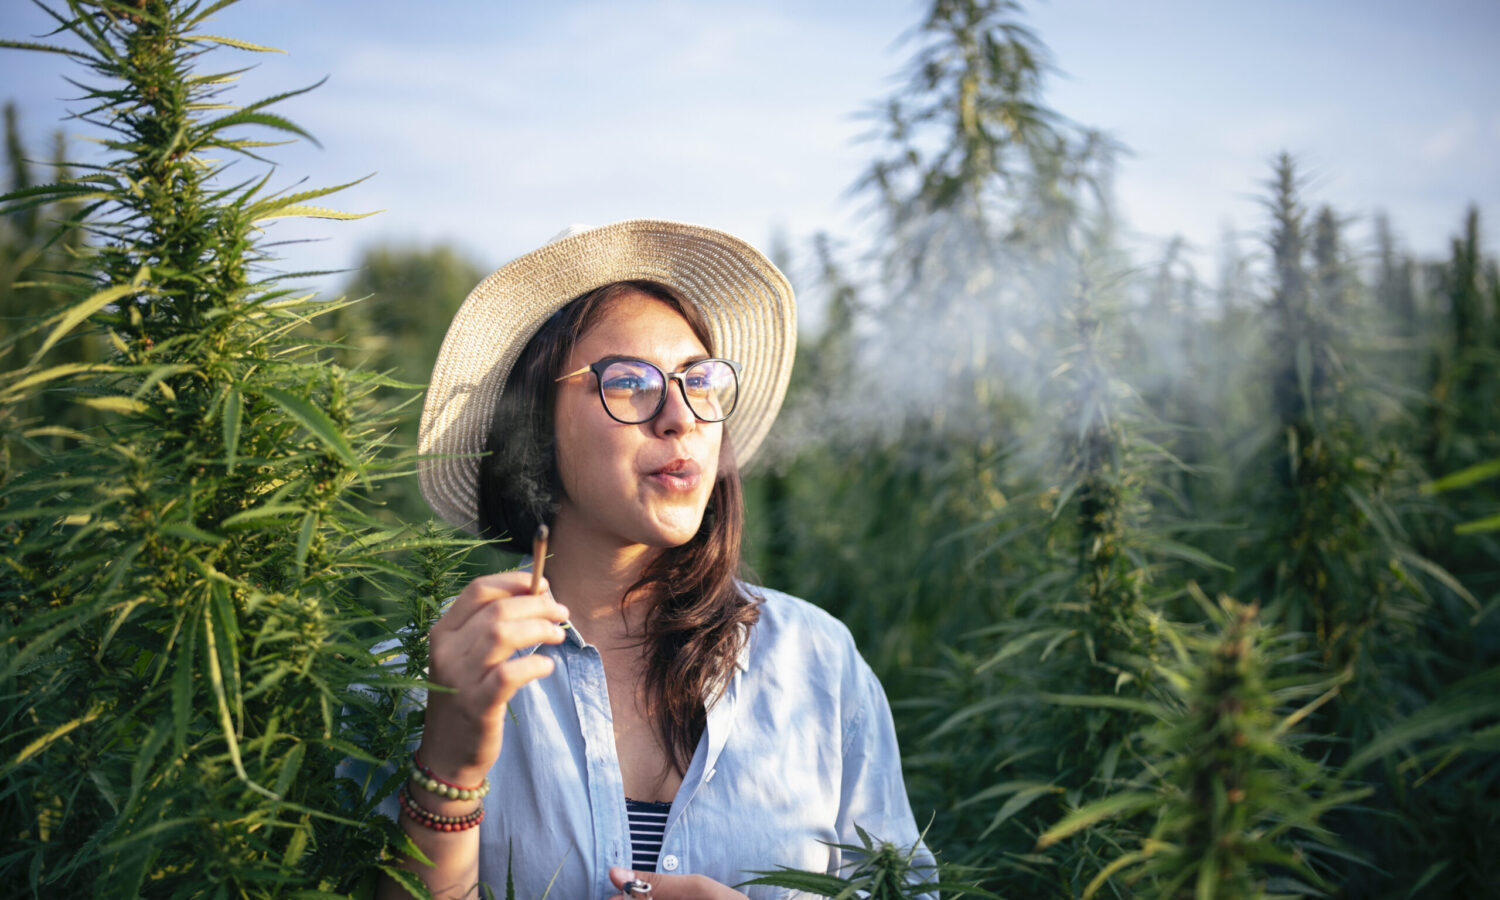 6 Cannabis Experiences You Can Be A Part Of In Legal States